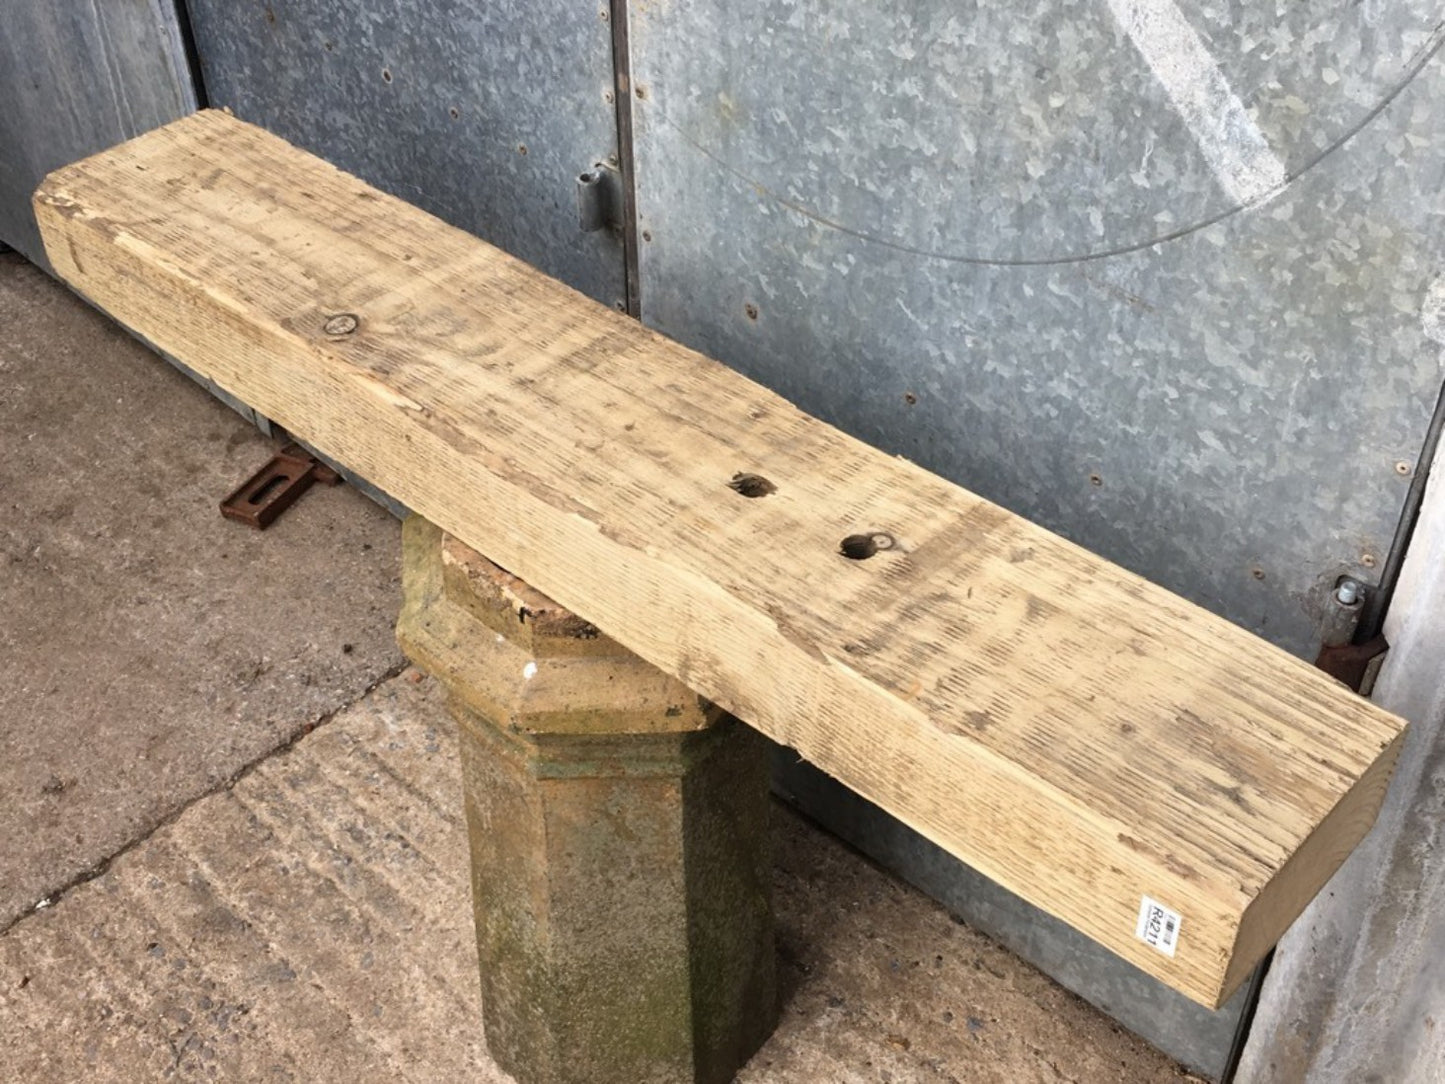 3ft 10 3/8" Or 1.18m Long Old Salvaged Solid Pine Beam